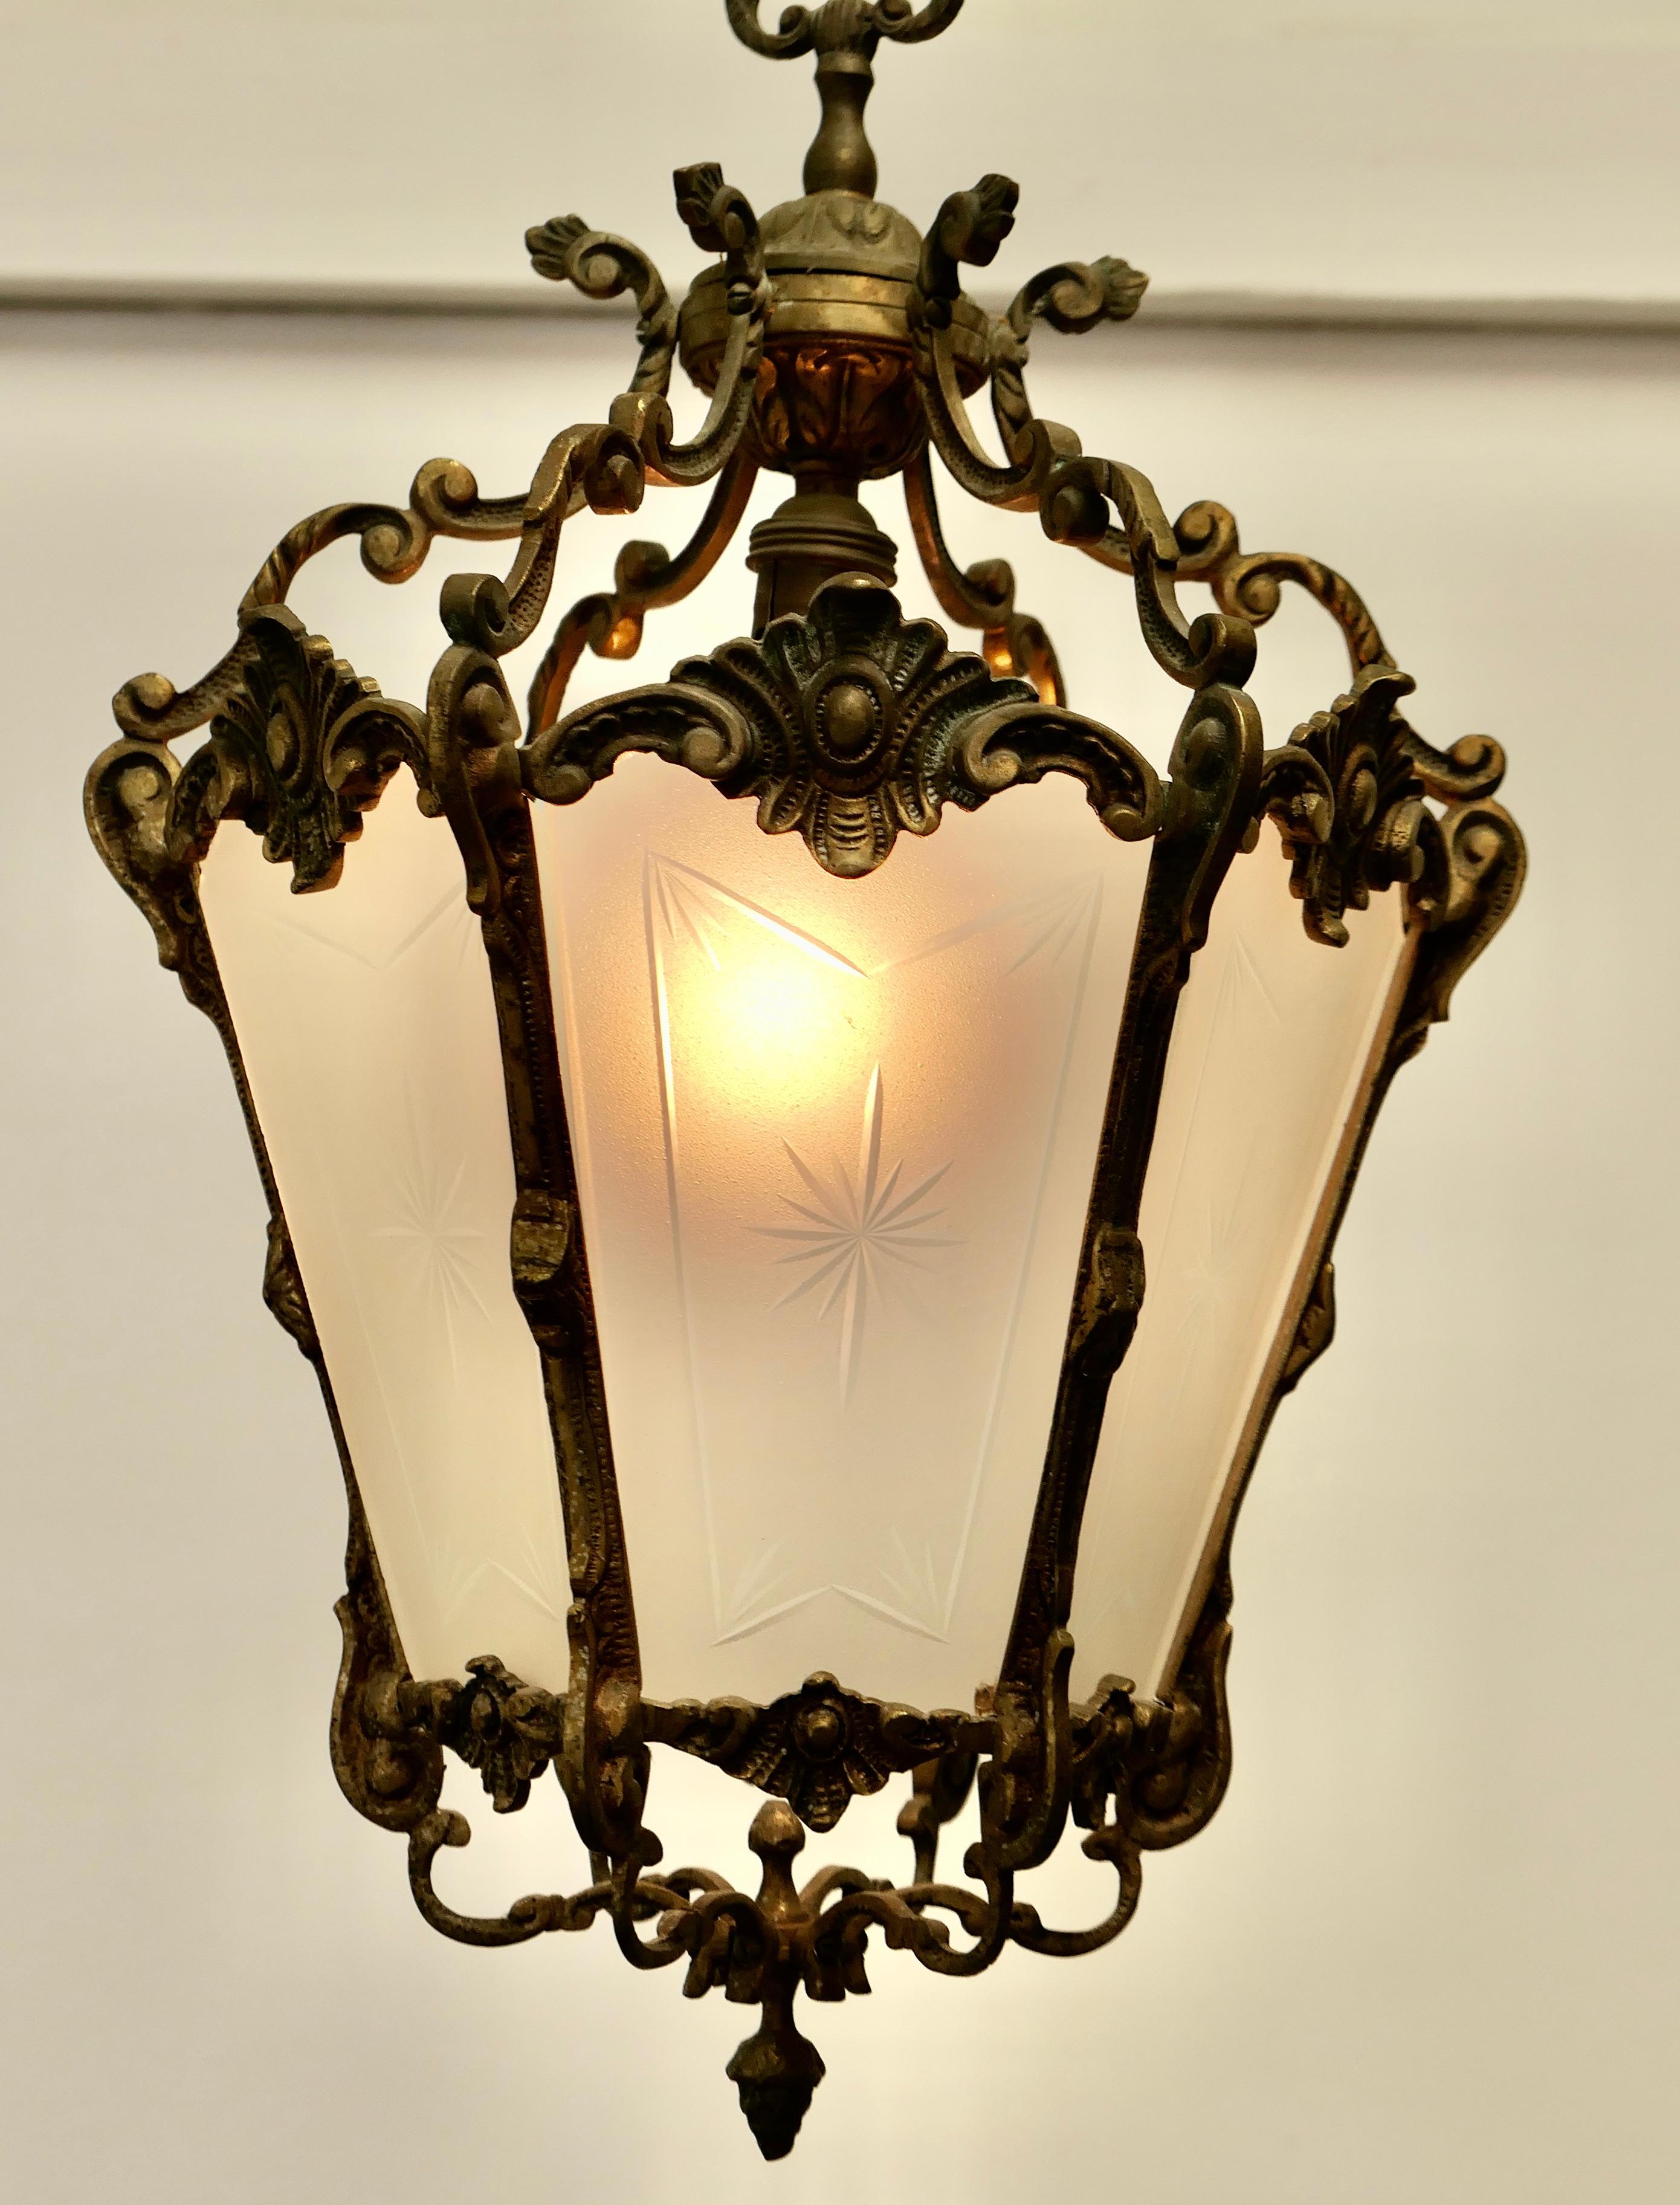 French Rococo Style Brass and Etched Glass Lantern Hall Light

A superb quality heavy brass lantern, the light has 6 opaque glass panels, these are etched with a starburst 

The lantern is decorated in the French style and it hangs from a brass